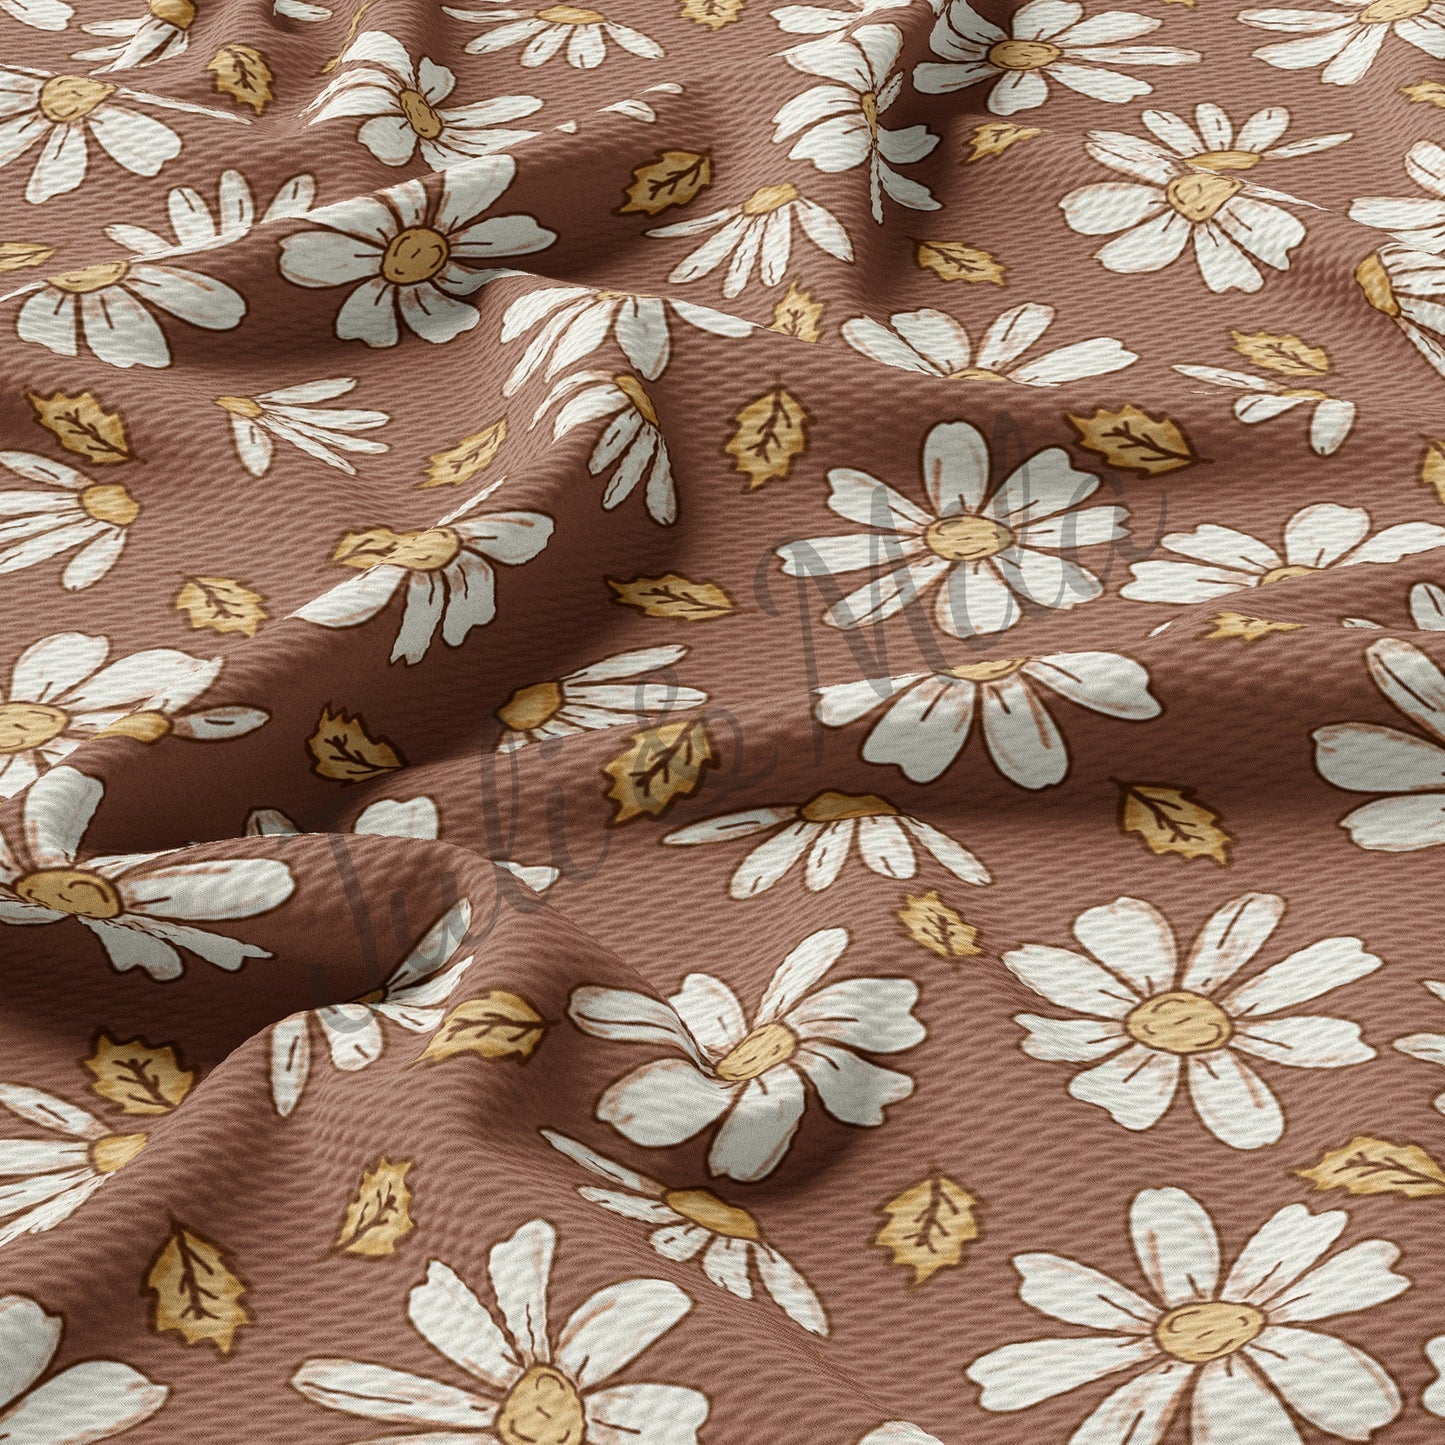 Bullet Textured Fabric Floral98